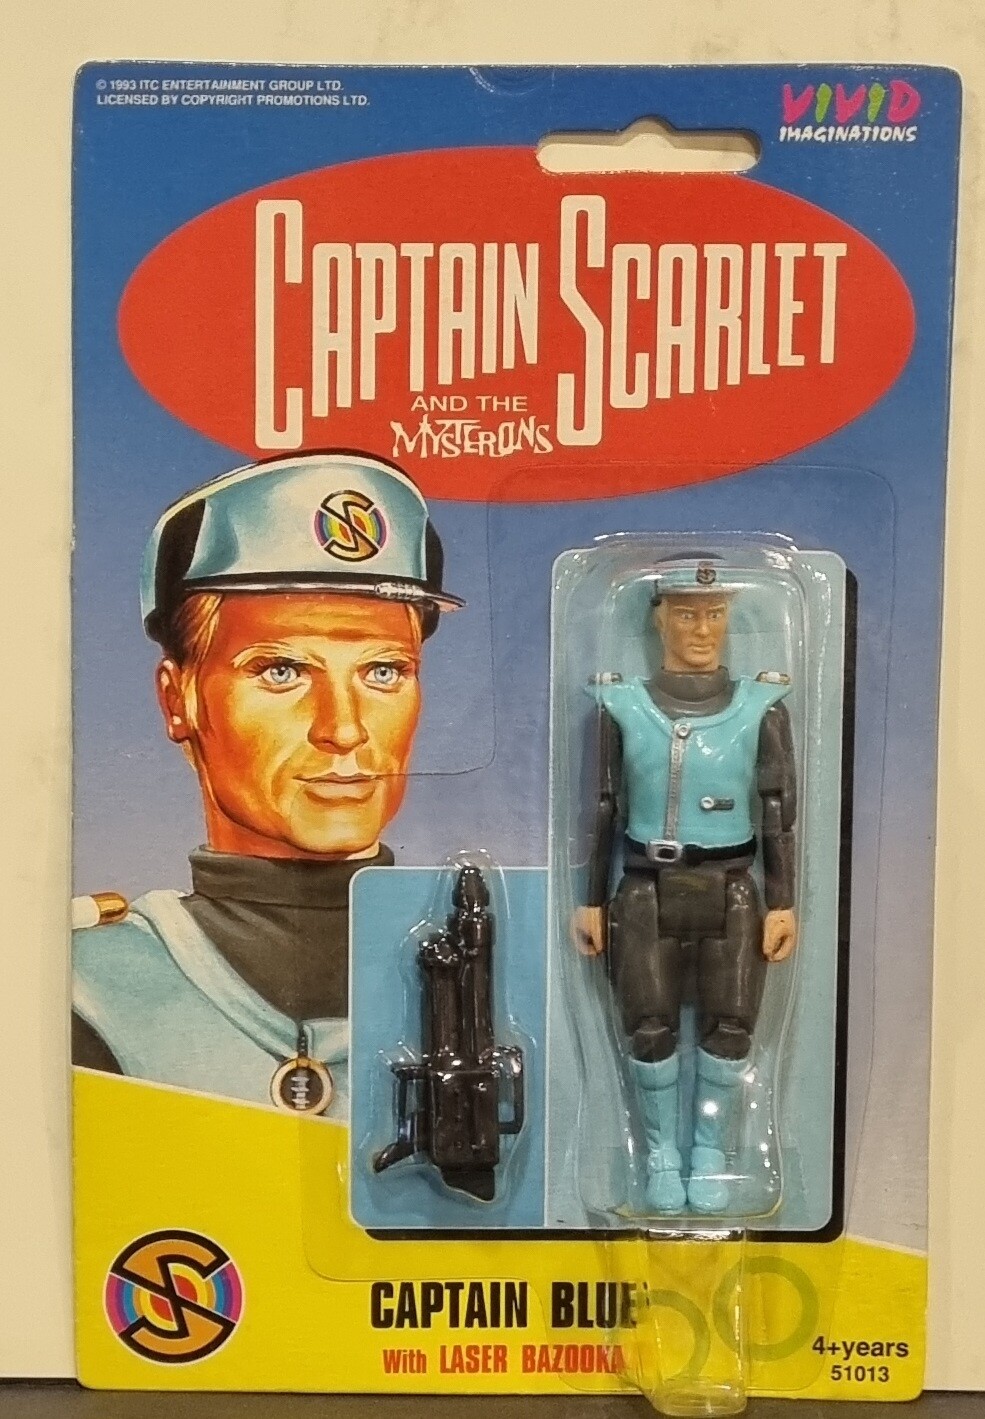 Actiefiguur, Captain Blue with laser bazooka, Captain Scarlet and the Mysterons